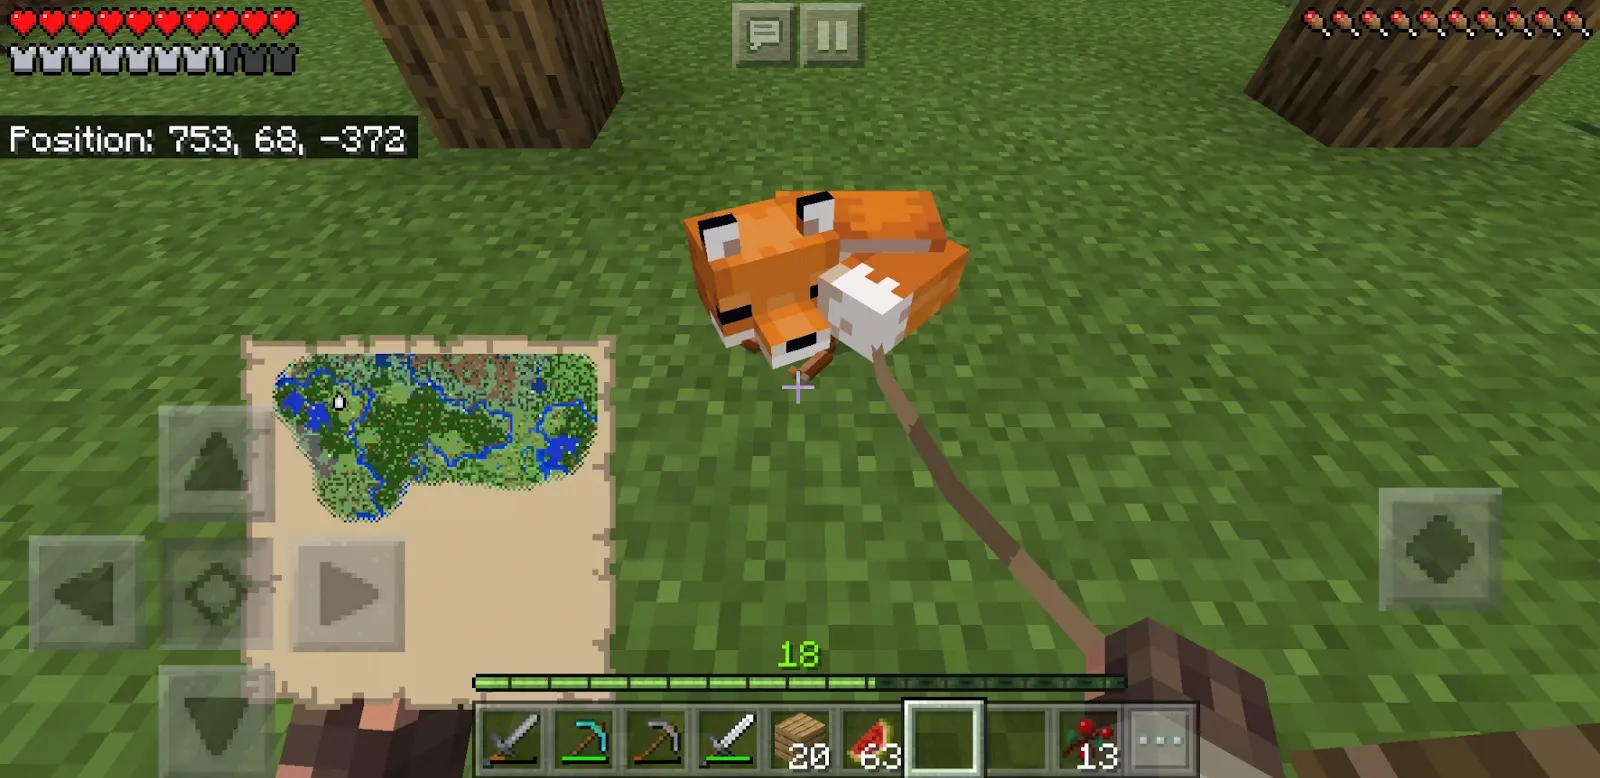 An image of a baby fox asleep on a leash in Minecraft